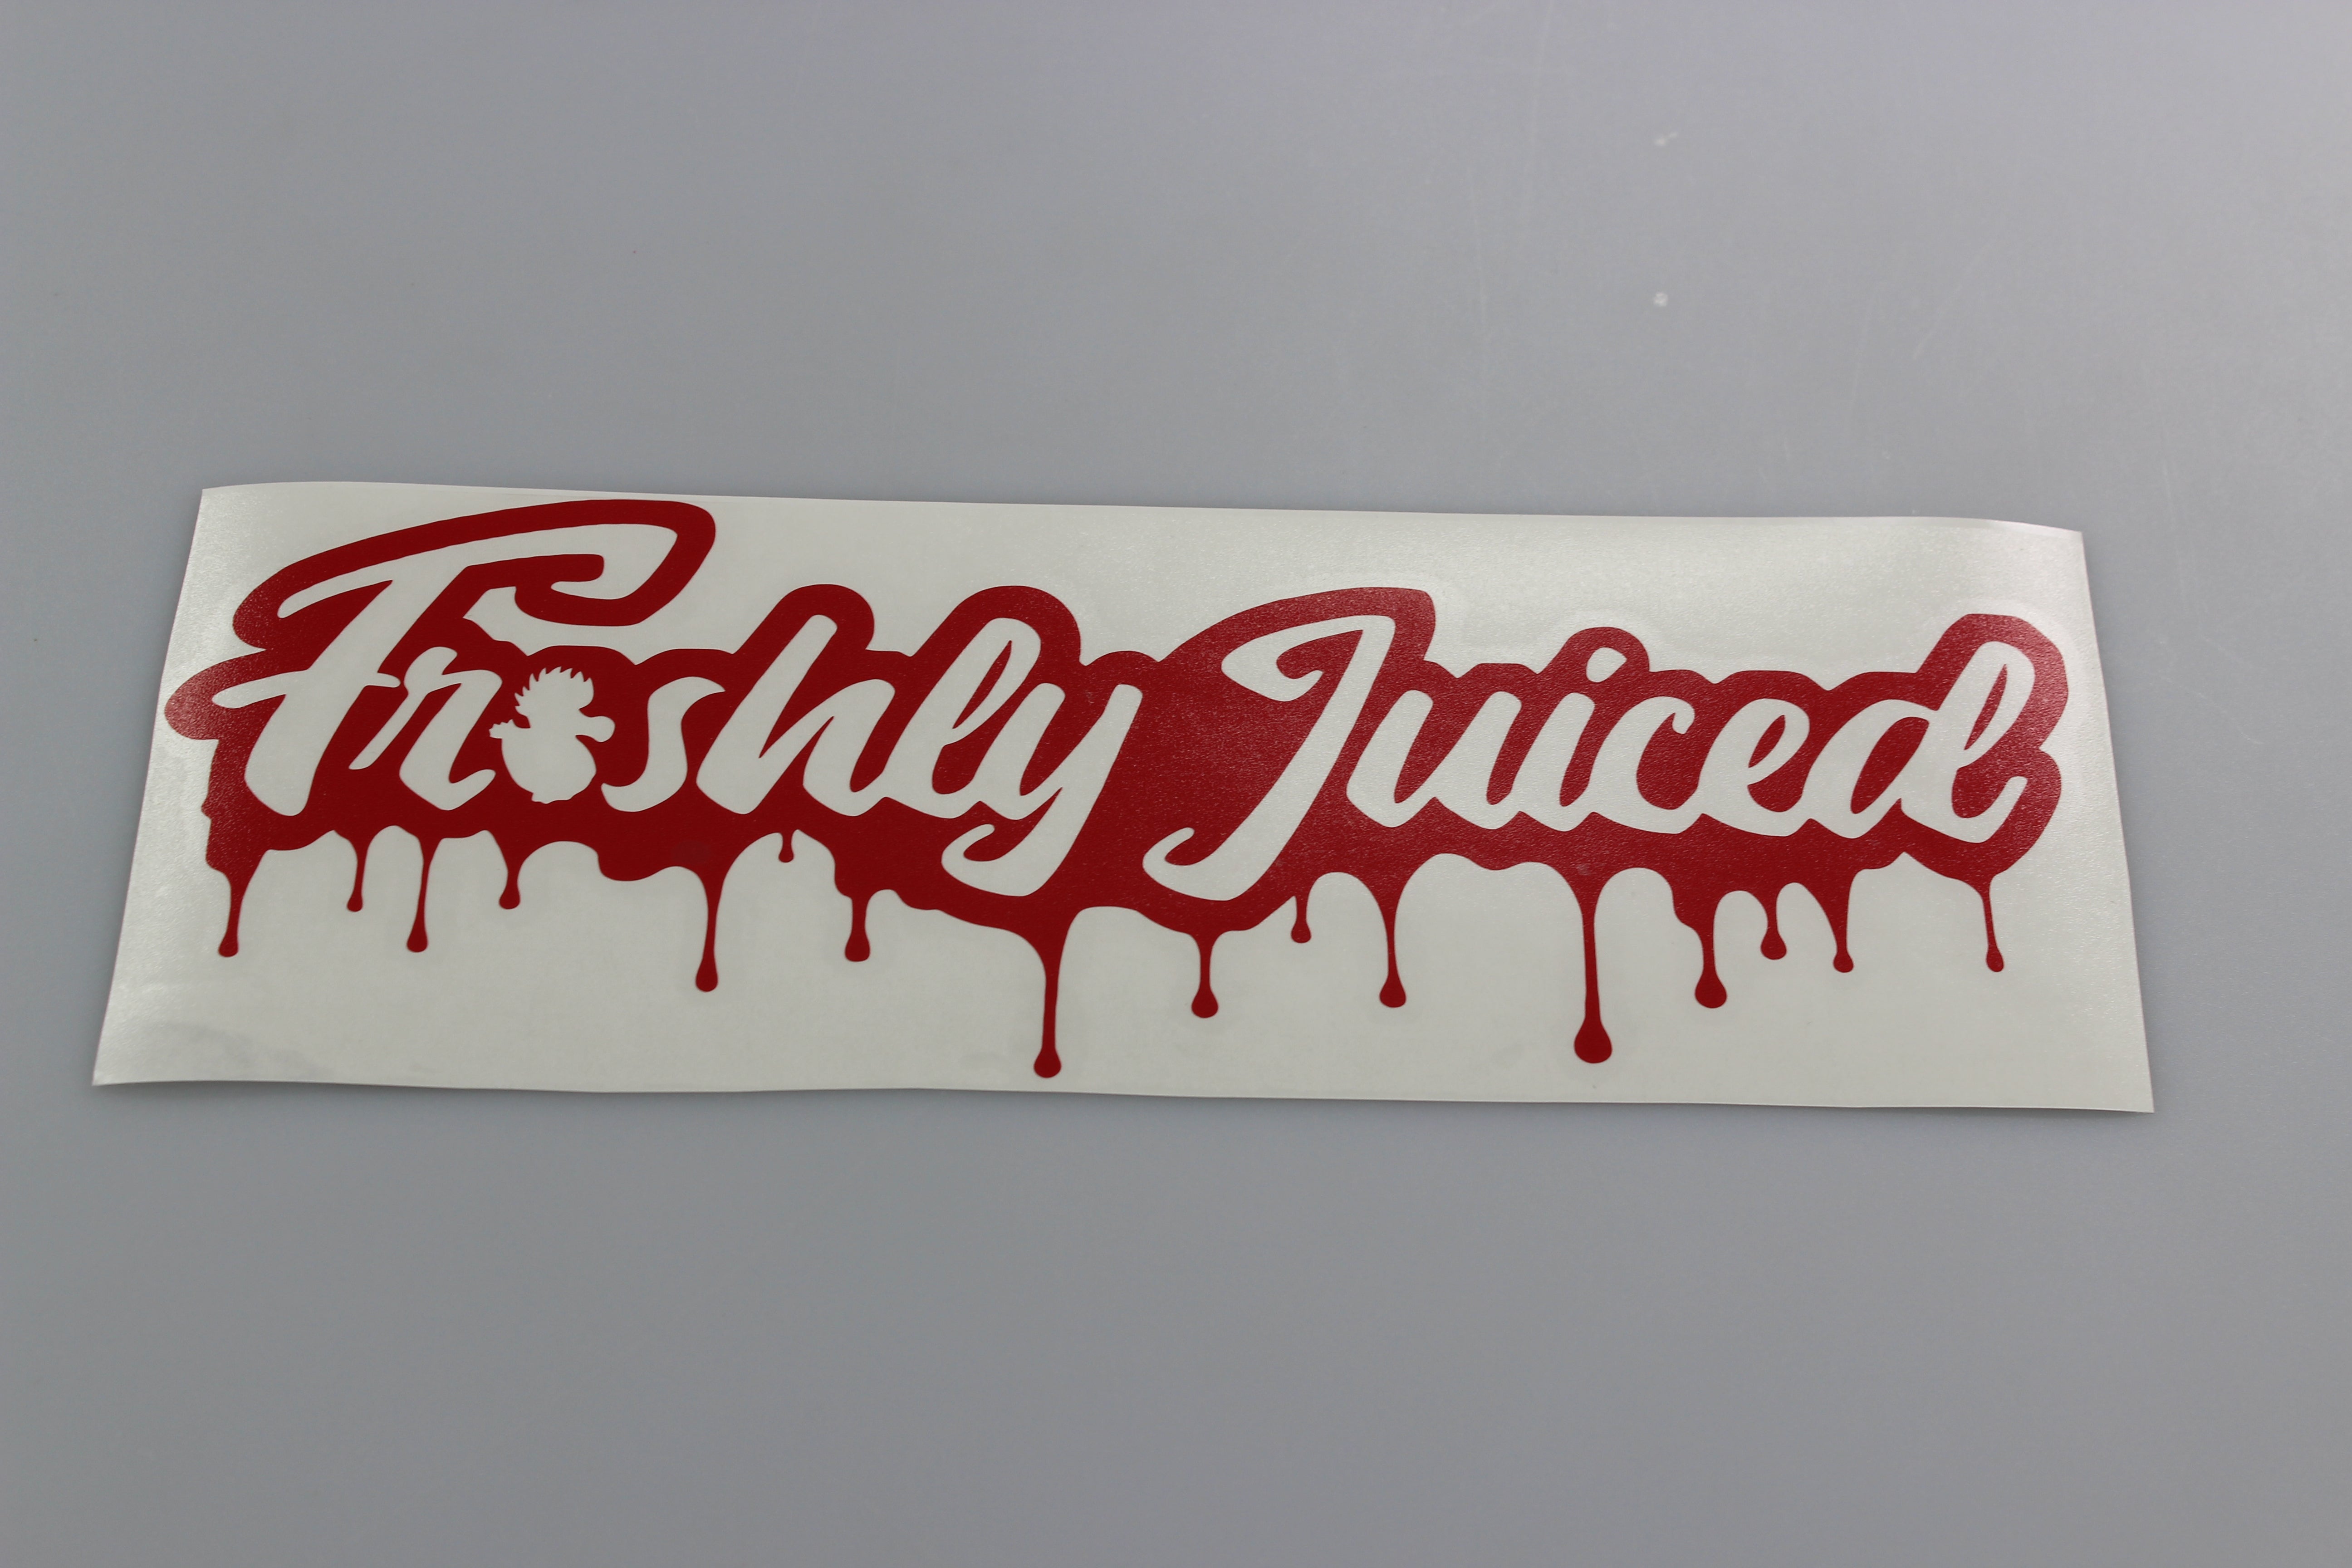 Freshly Juiced "Dripping with Freshness" vinyl scene stickers (11 colourways available) HS 4911990000